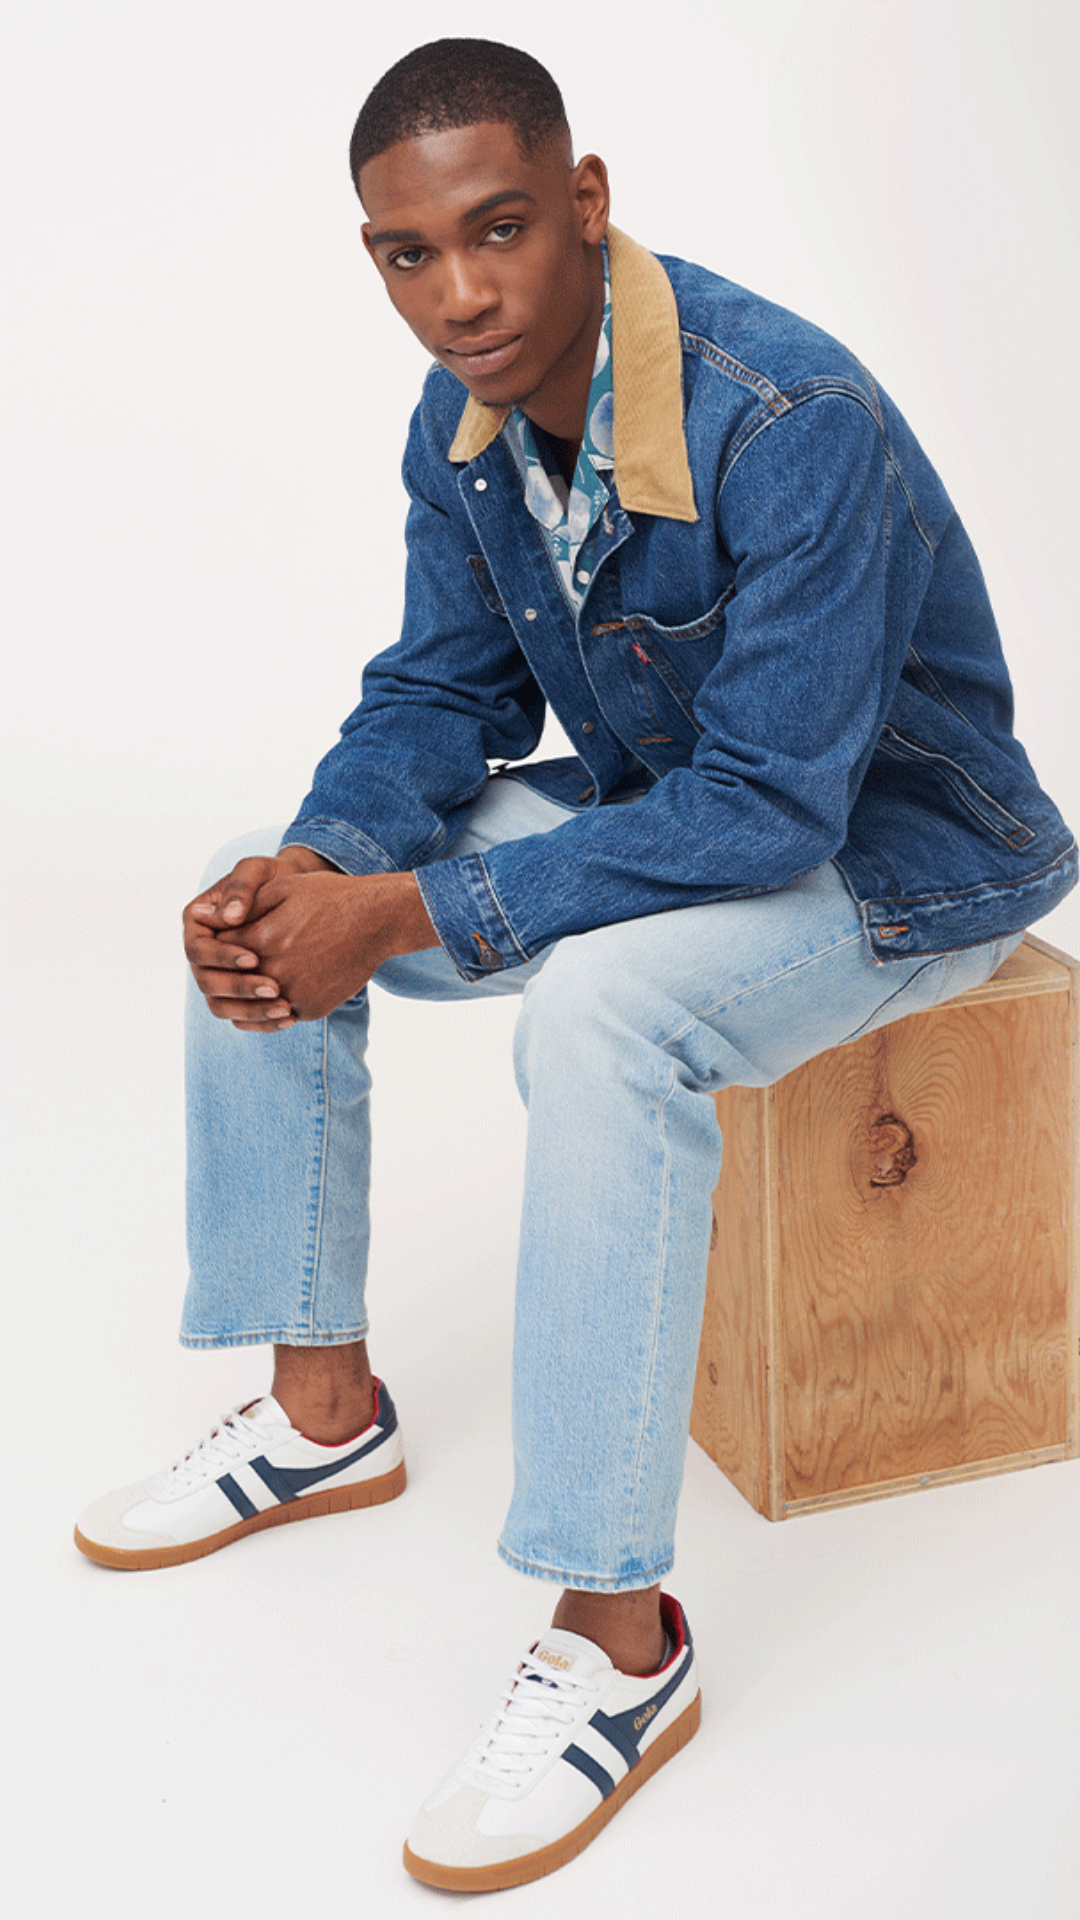 image of a man sitting on a wooden box. he is wearing a dark denim jacket with a beige collar, light denim jeans and white sneakers